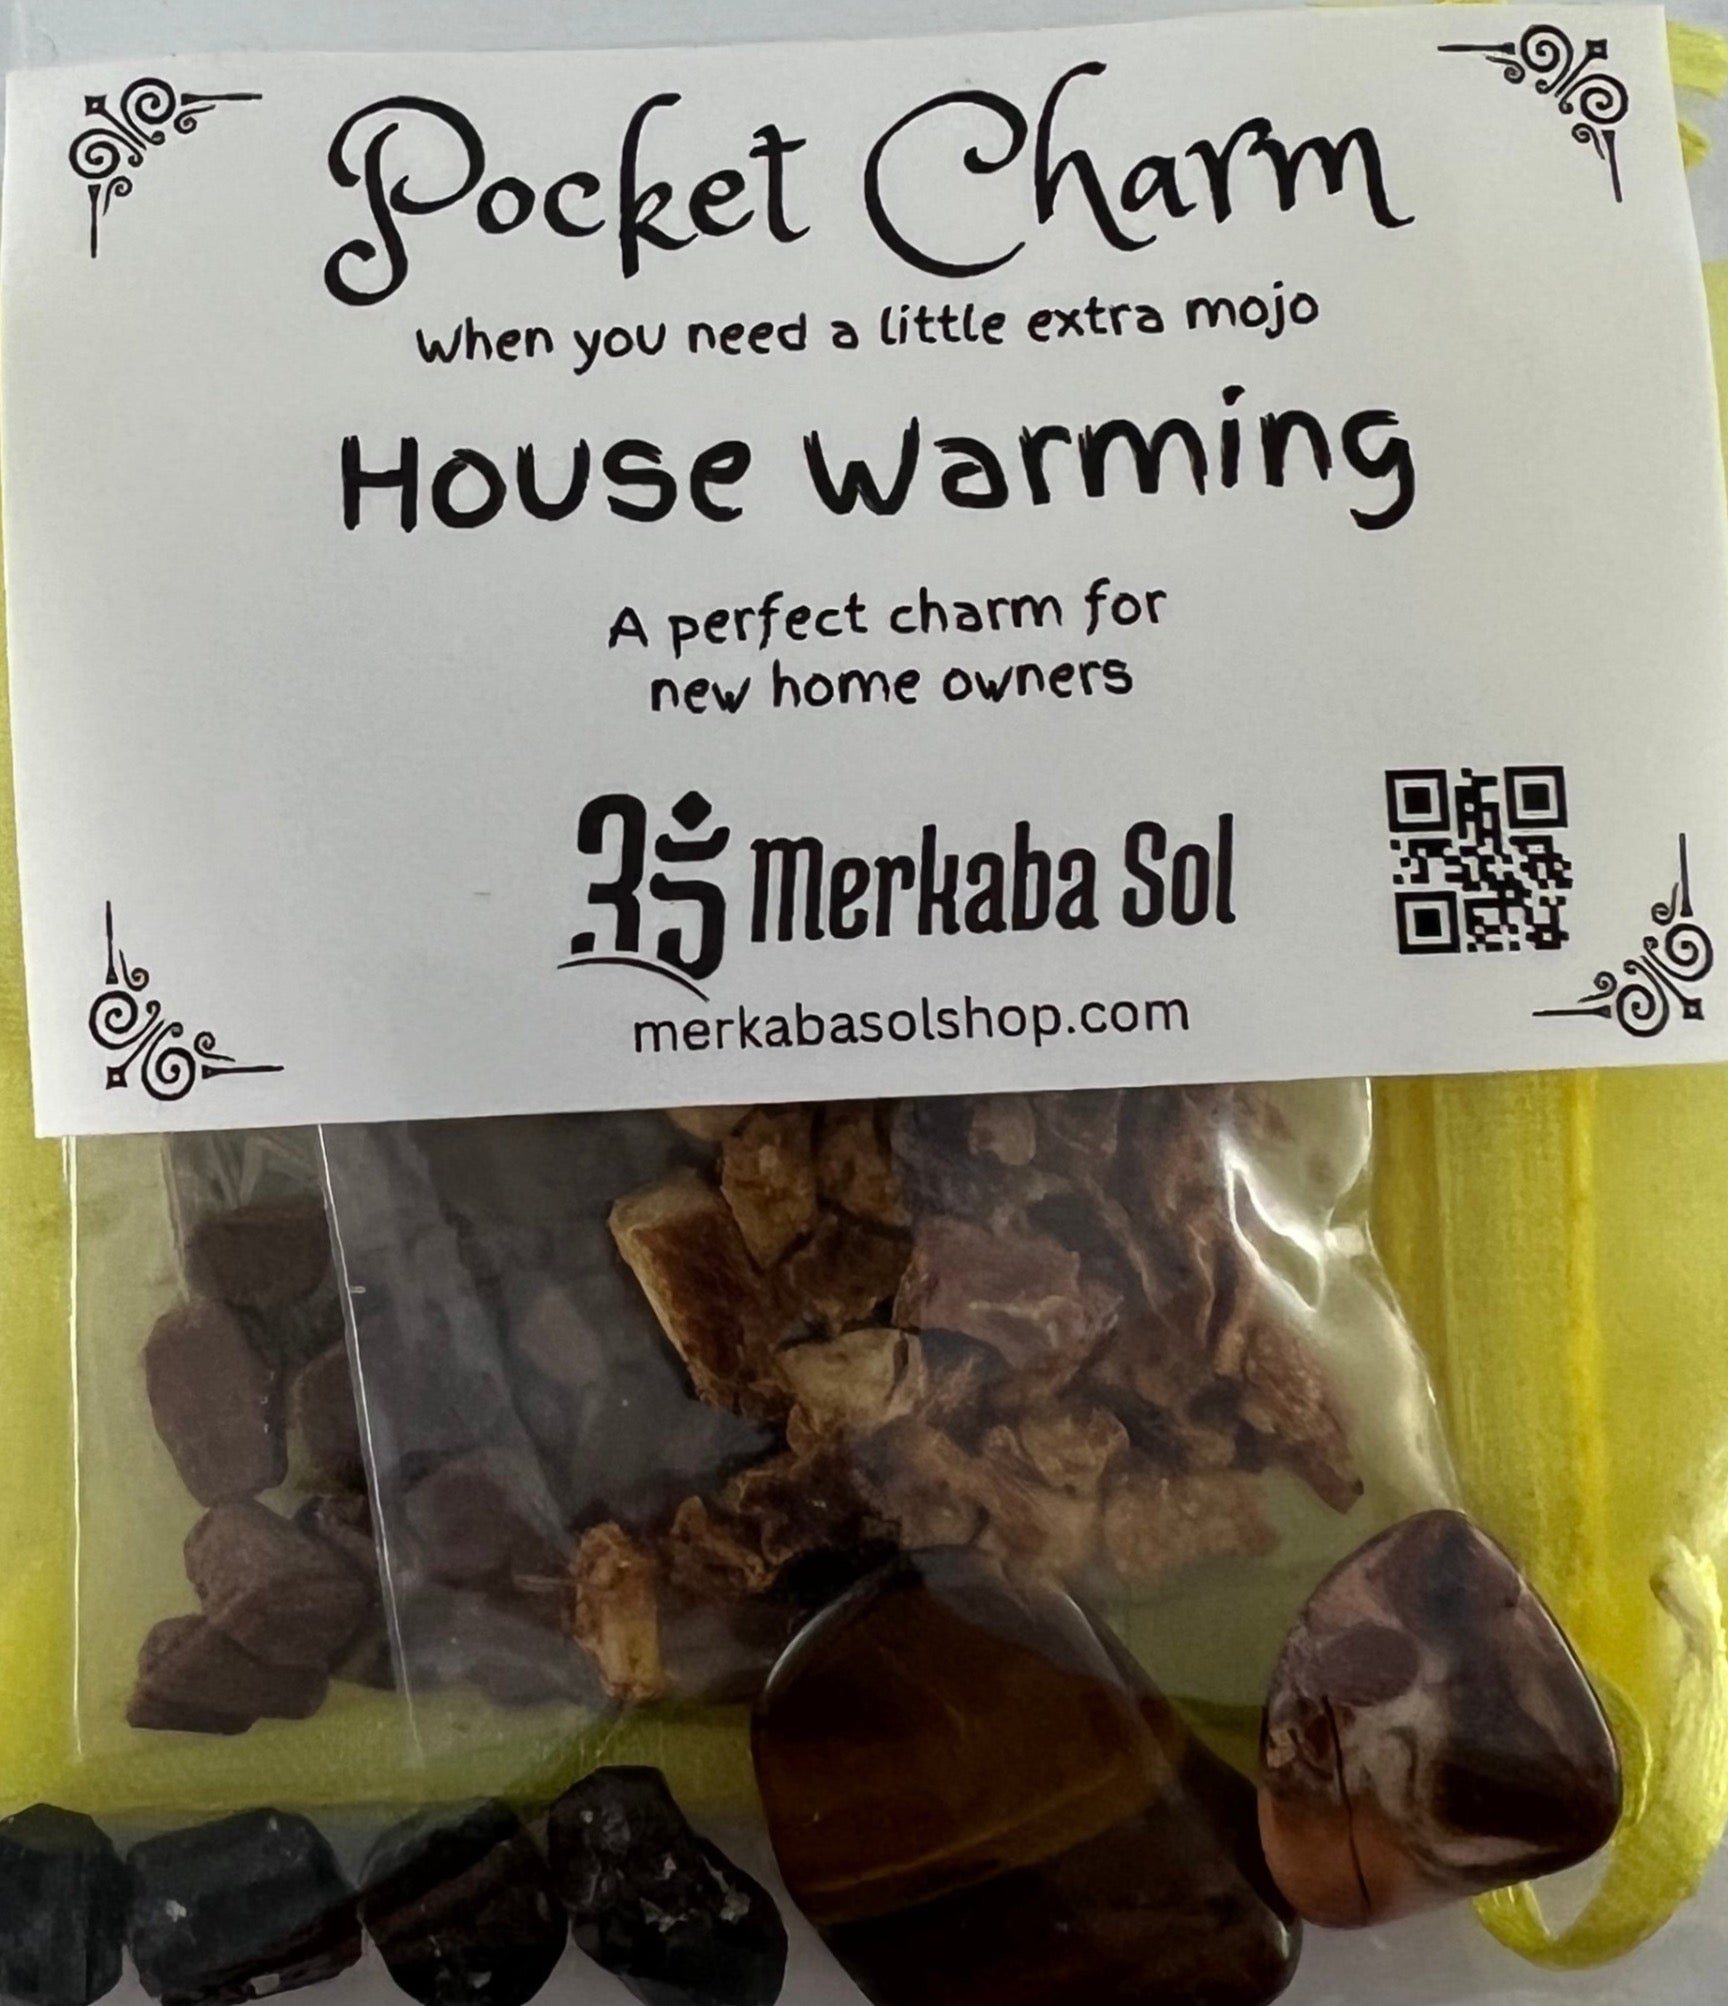 Package is see through with white label  that says Pocket Charm Housewarming 